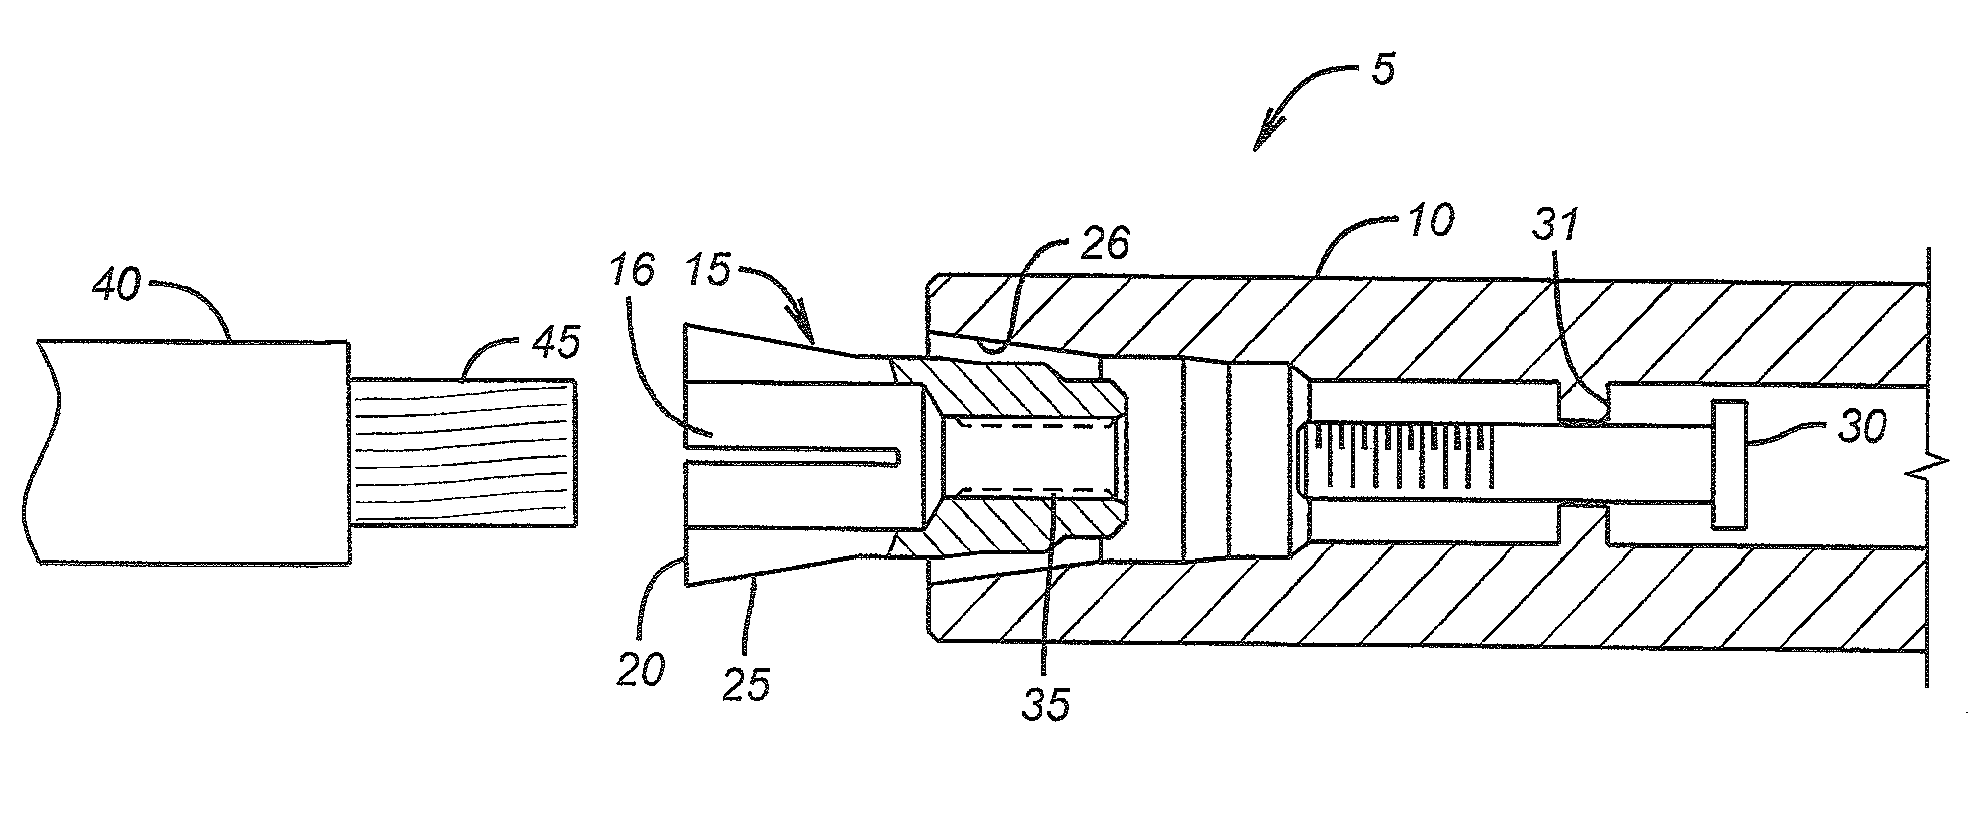 Apparatus and method for electrical and mechanical connection